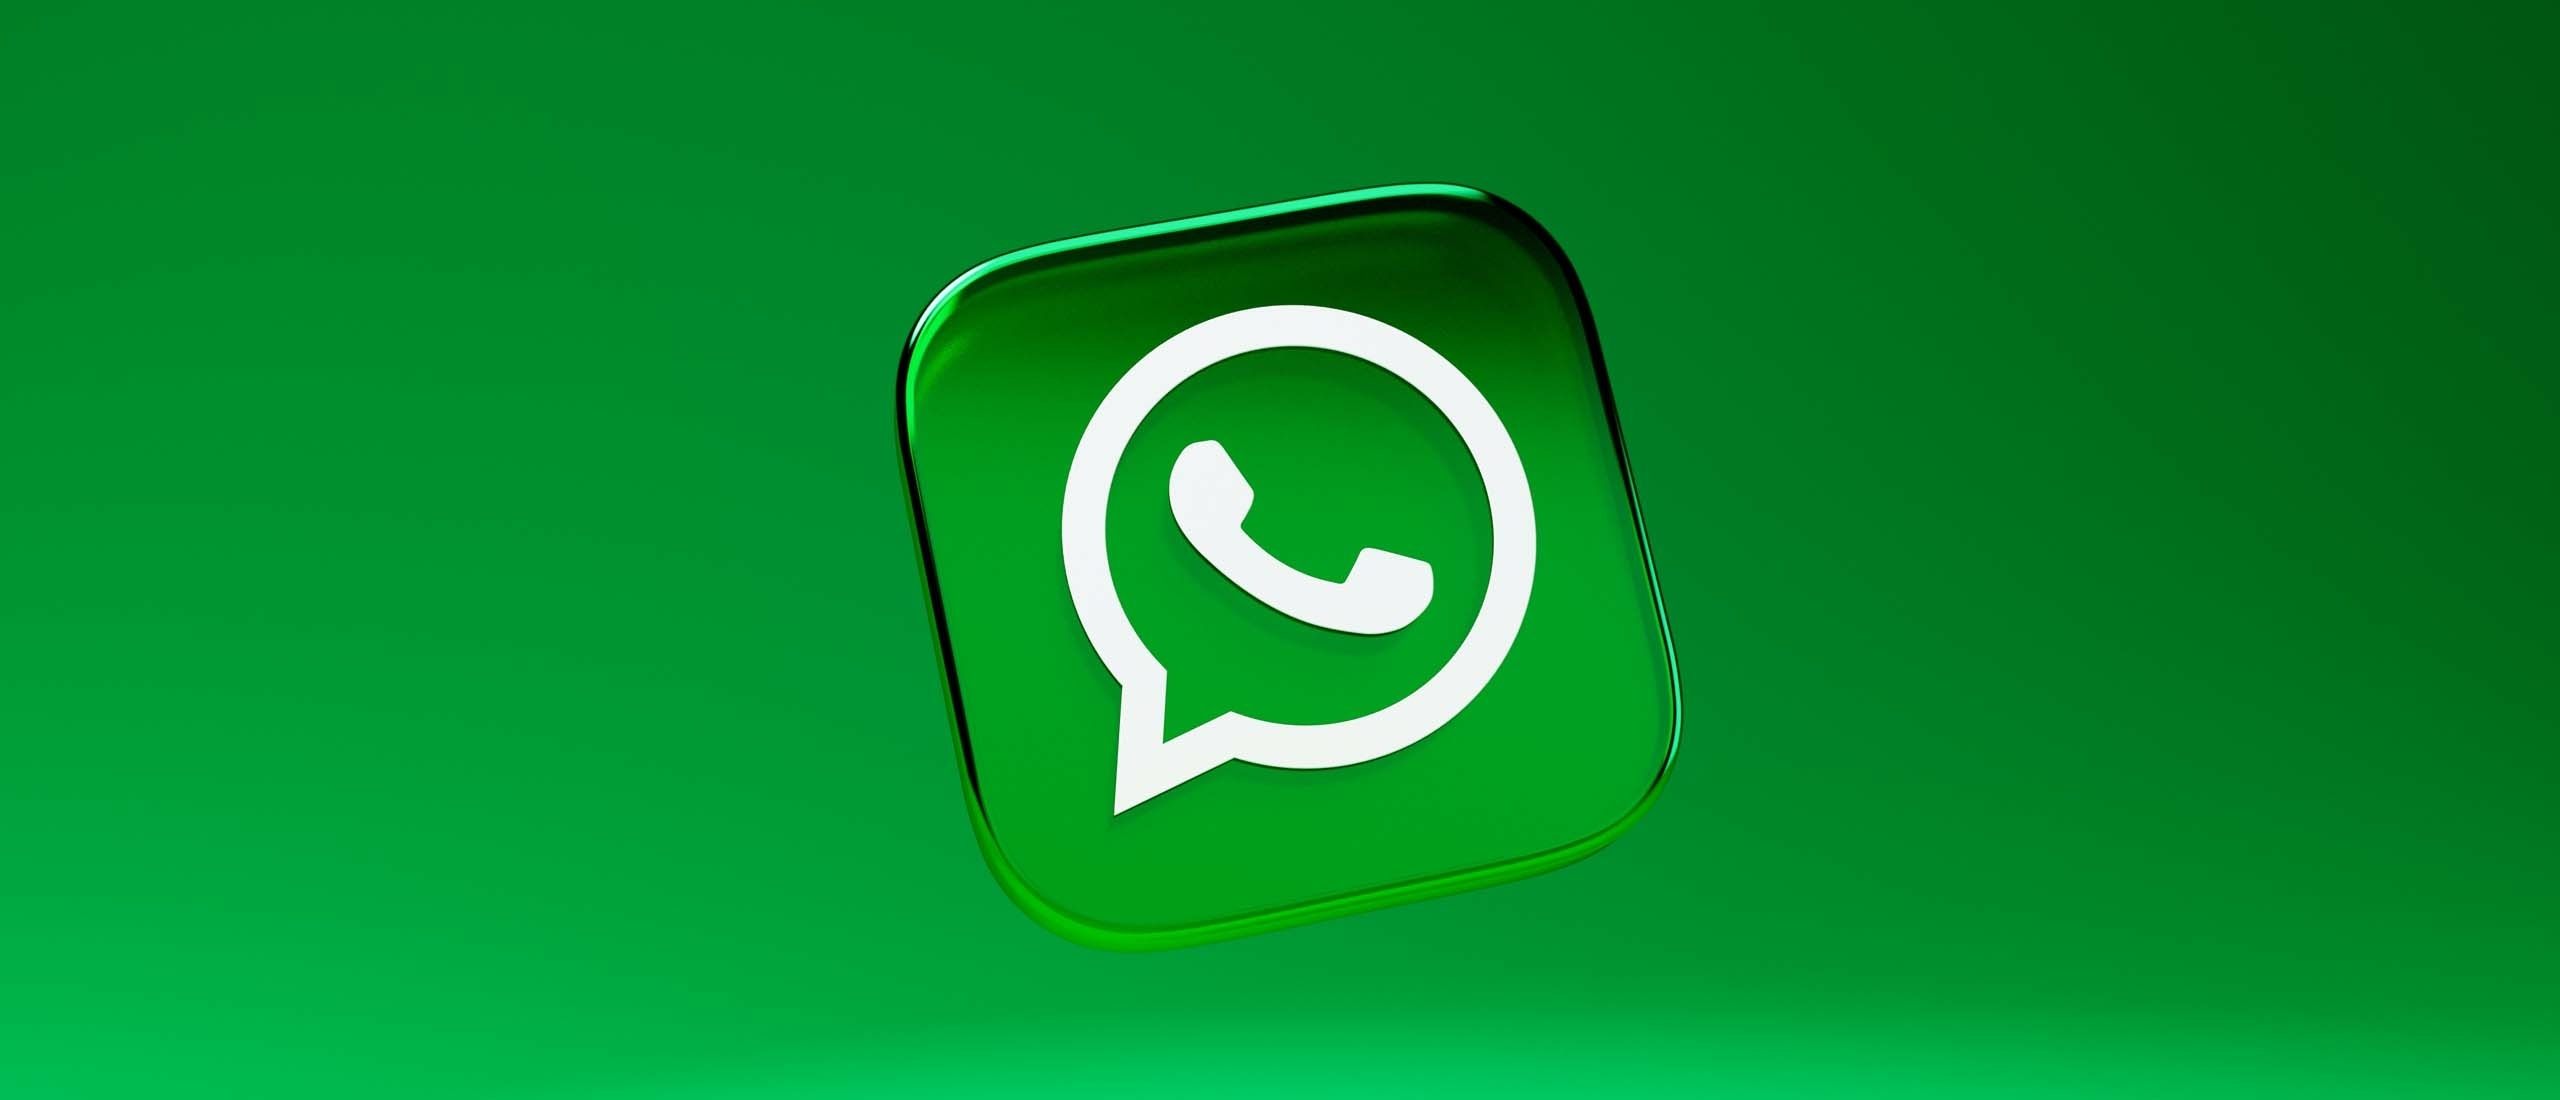 WhatsApp Business; Goed idee of grote fout?